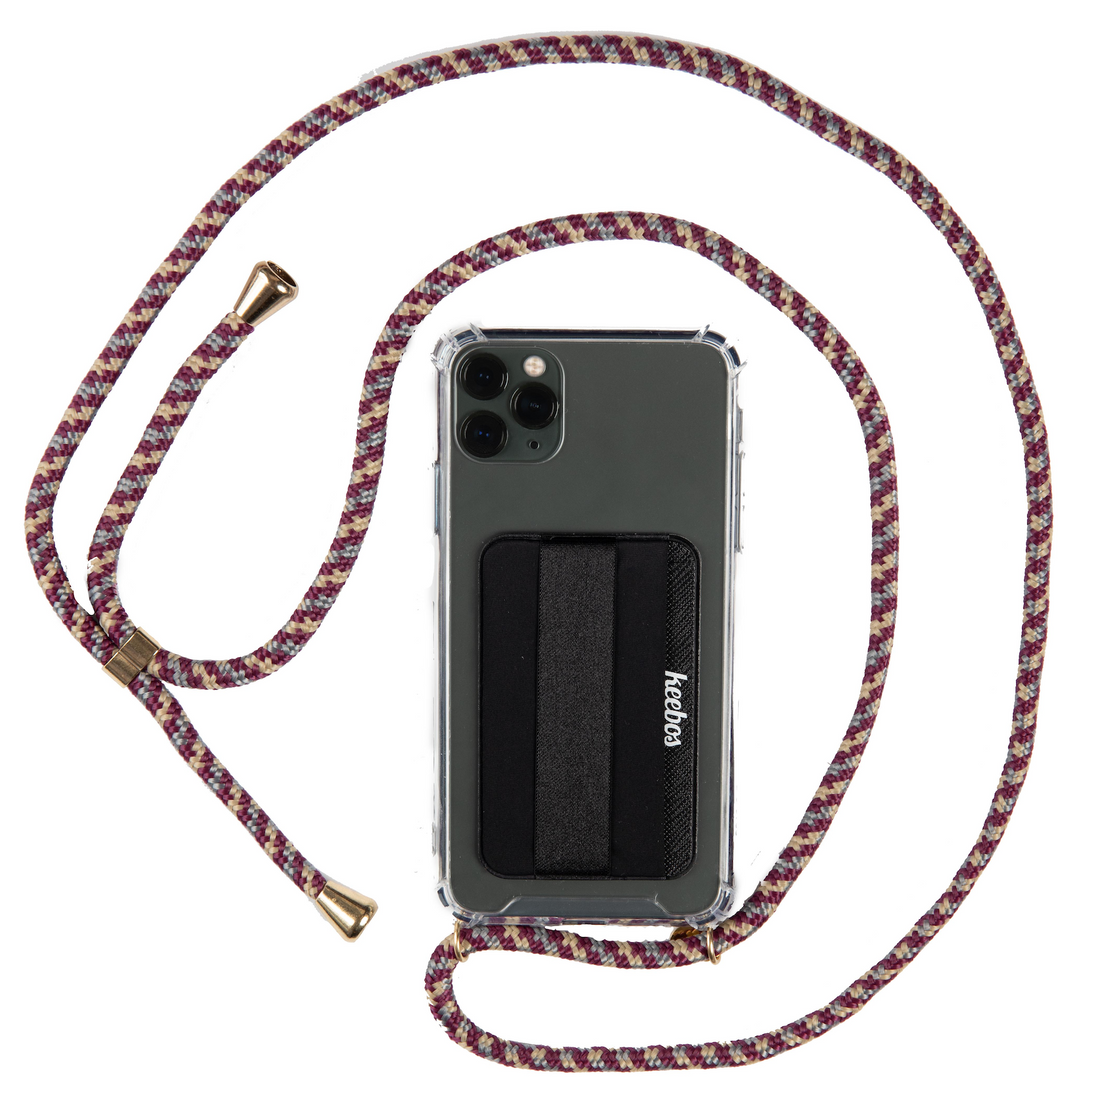 Keebos - The Best Cell Phone Lanyard Case 2022